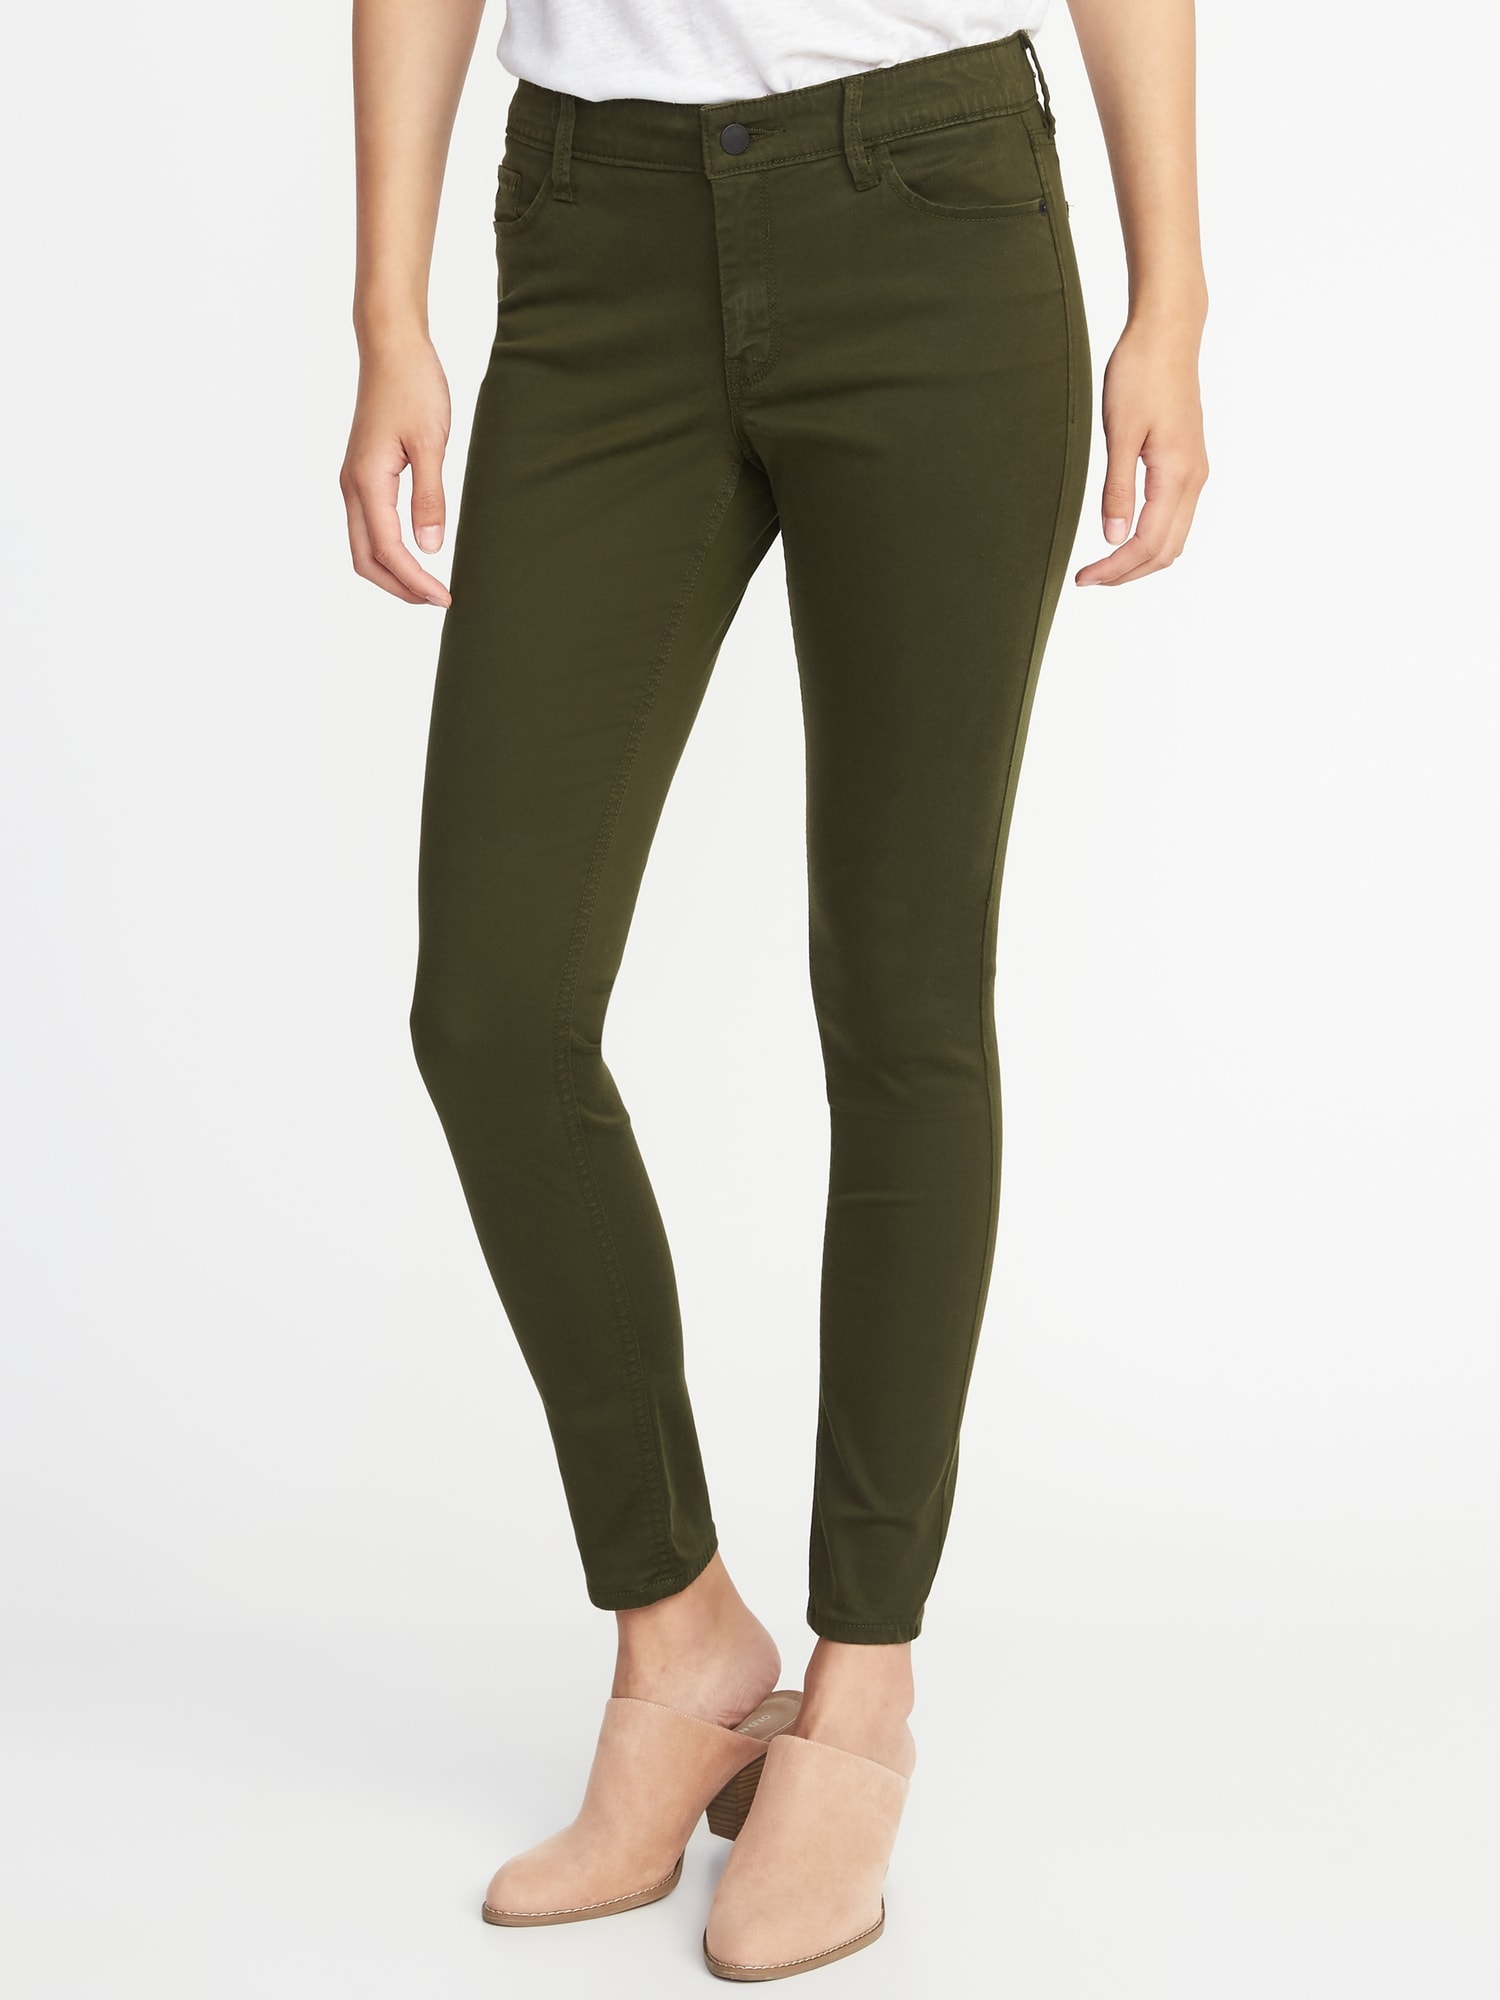 Mid-Rise Sateen Rockstar Super Skinny Jeans for Women | Old Navy